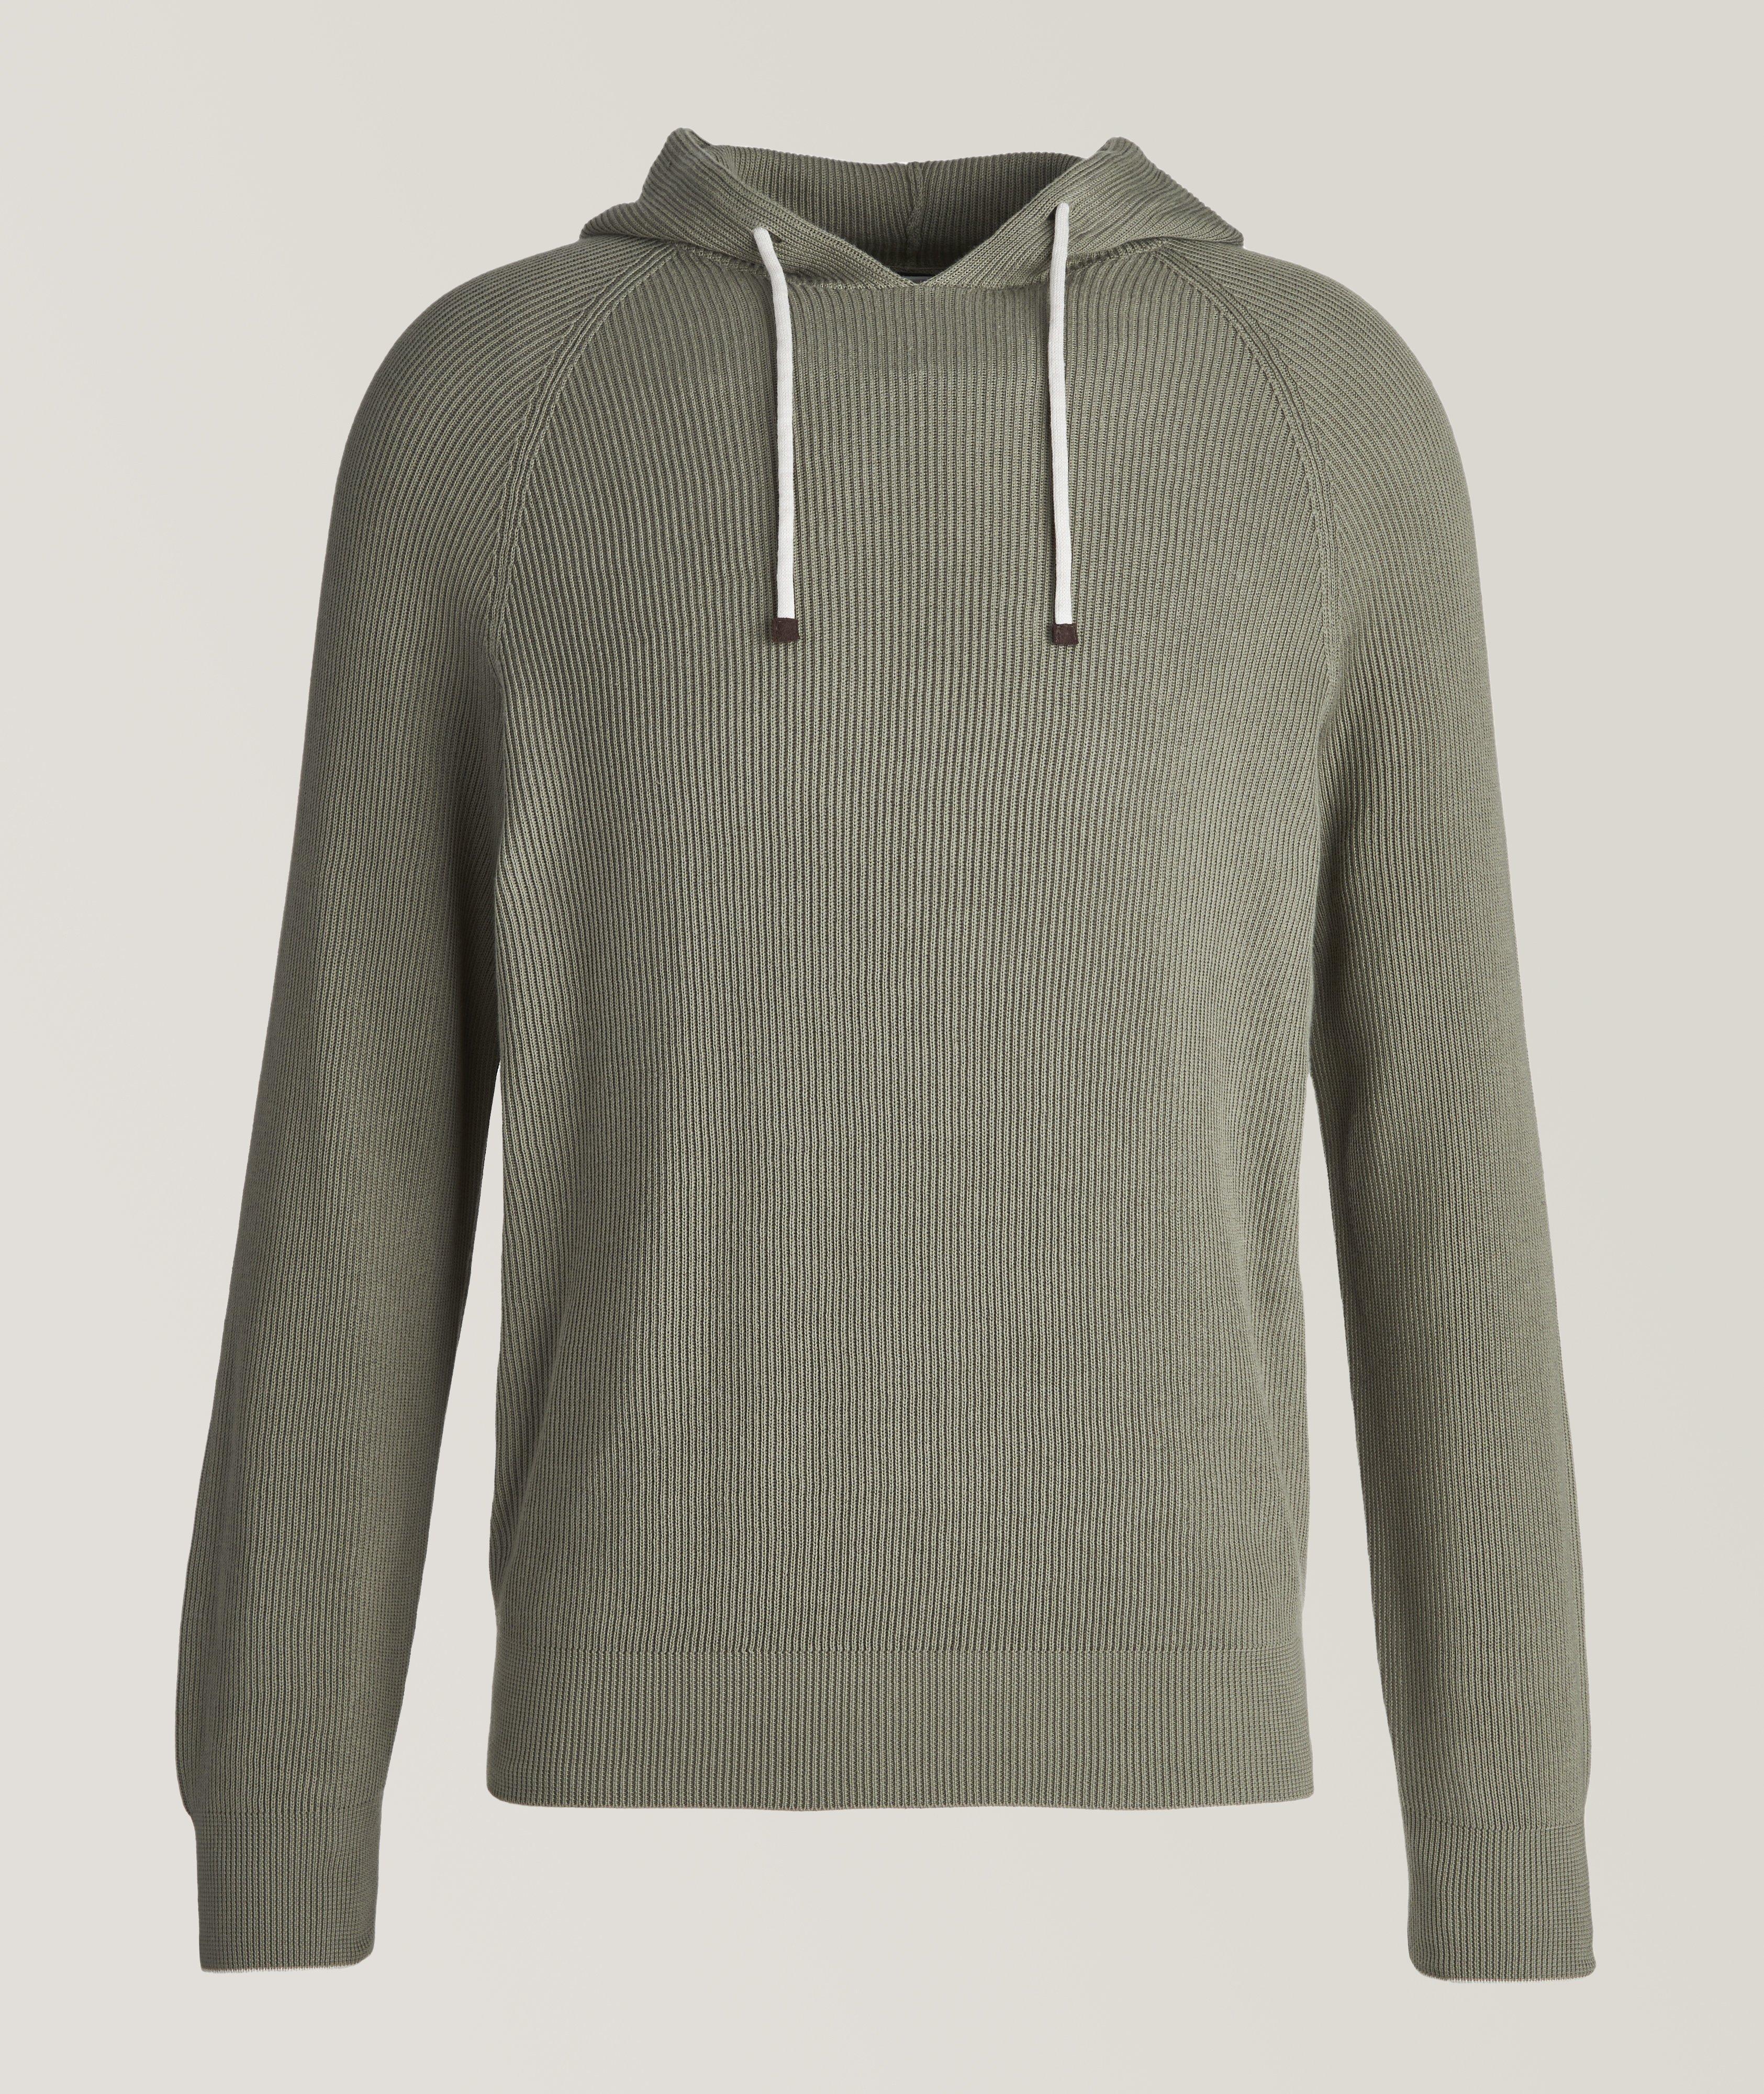 Cotton Rib Knit Hooded Pullover image 0